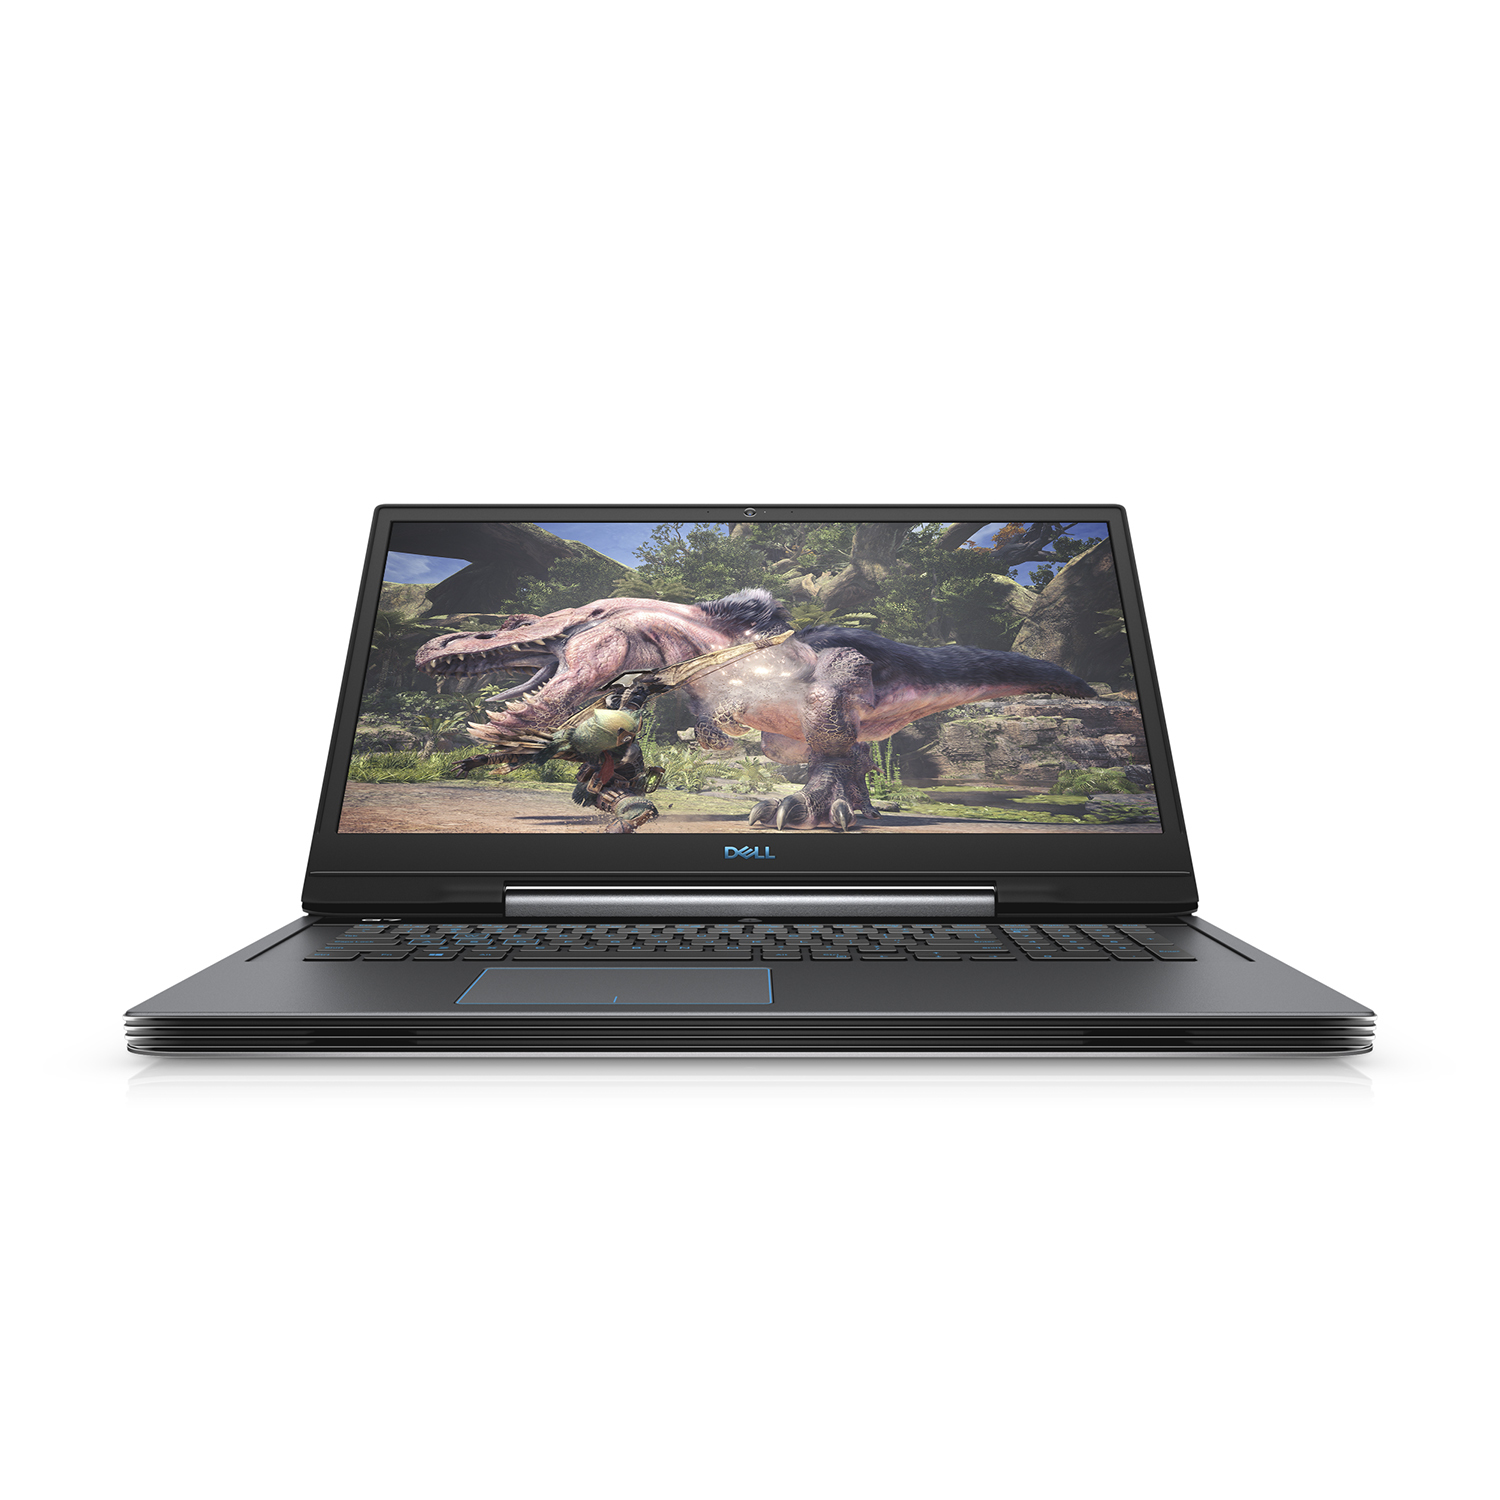 Dell G7 17 7790 Gaming Laptop, 17.3'' FHD, Intel Core i5-9300H, NVIDIA GeForce RTX 2060, 8GB RAM, 128 GB SSD + 1TB HDD, Windows 10 Home, G7790-5695GRY-PUS (Google Classroom Compatible) - image 4 of 16